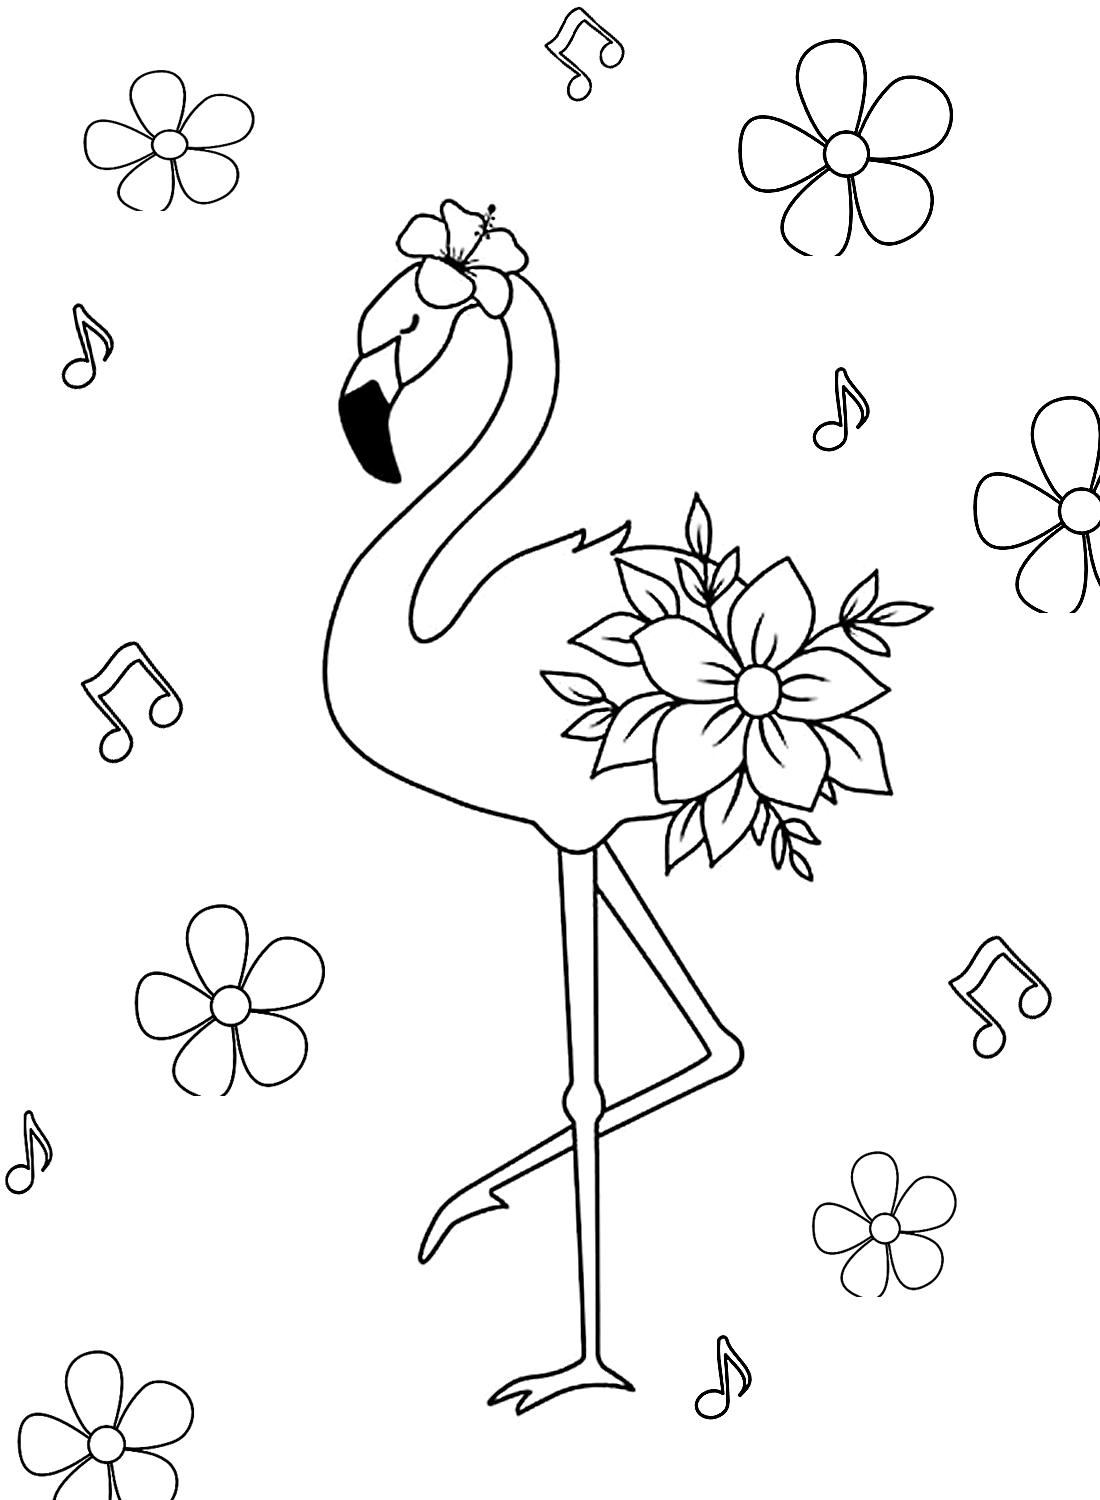 Flowers and Flamingo Sheet from Flamingo